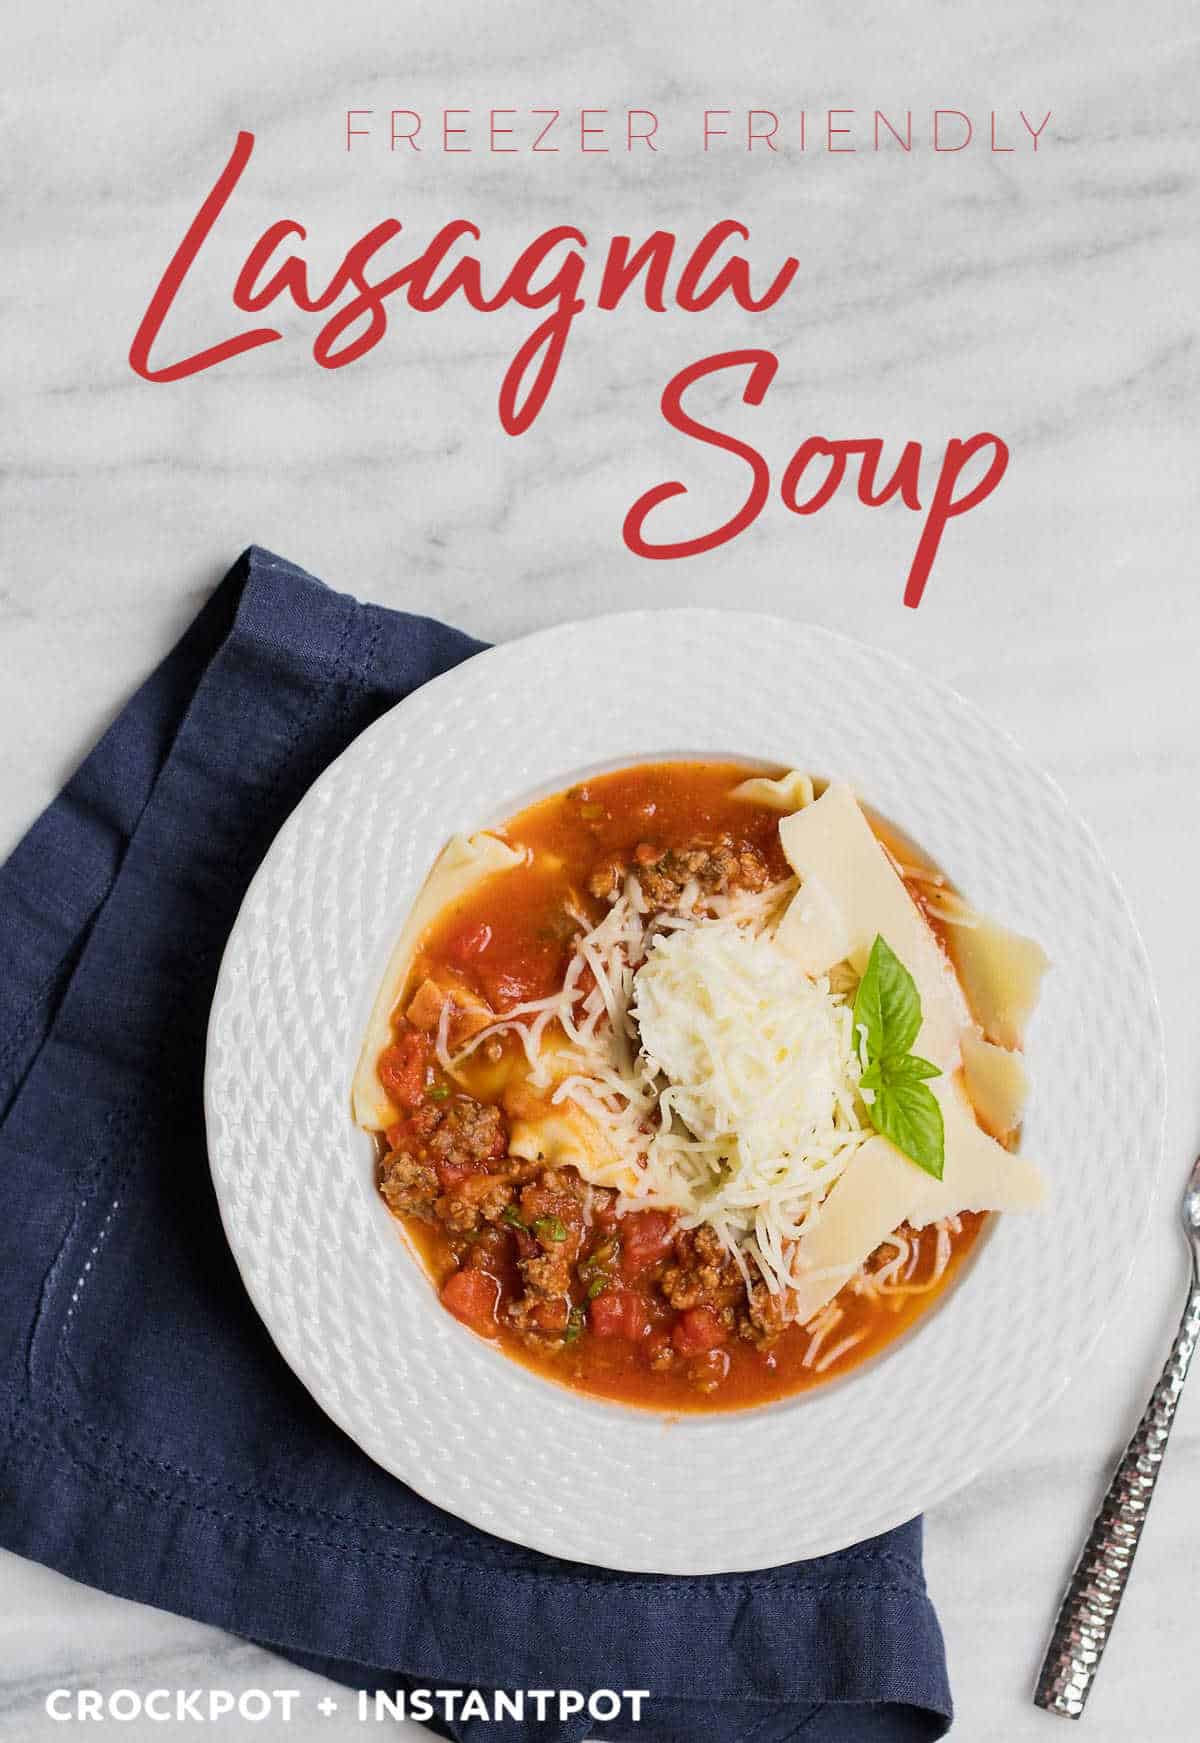 A white bowl is lasagna soup topped with cheese and sprig of herbs with a blue napkin underneath and a silver fork on the side. The words "Freezer Friendly Lasagna Soup" are at the top and "Crockpot + InstantPot" are at the bottom.